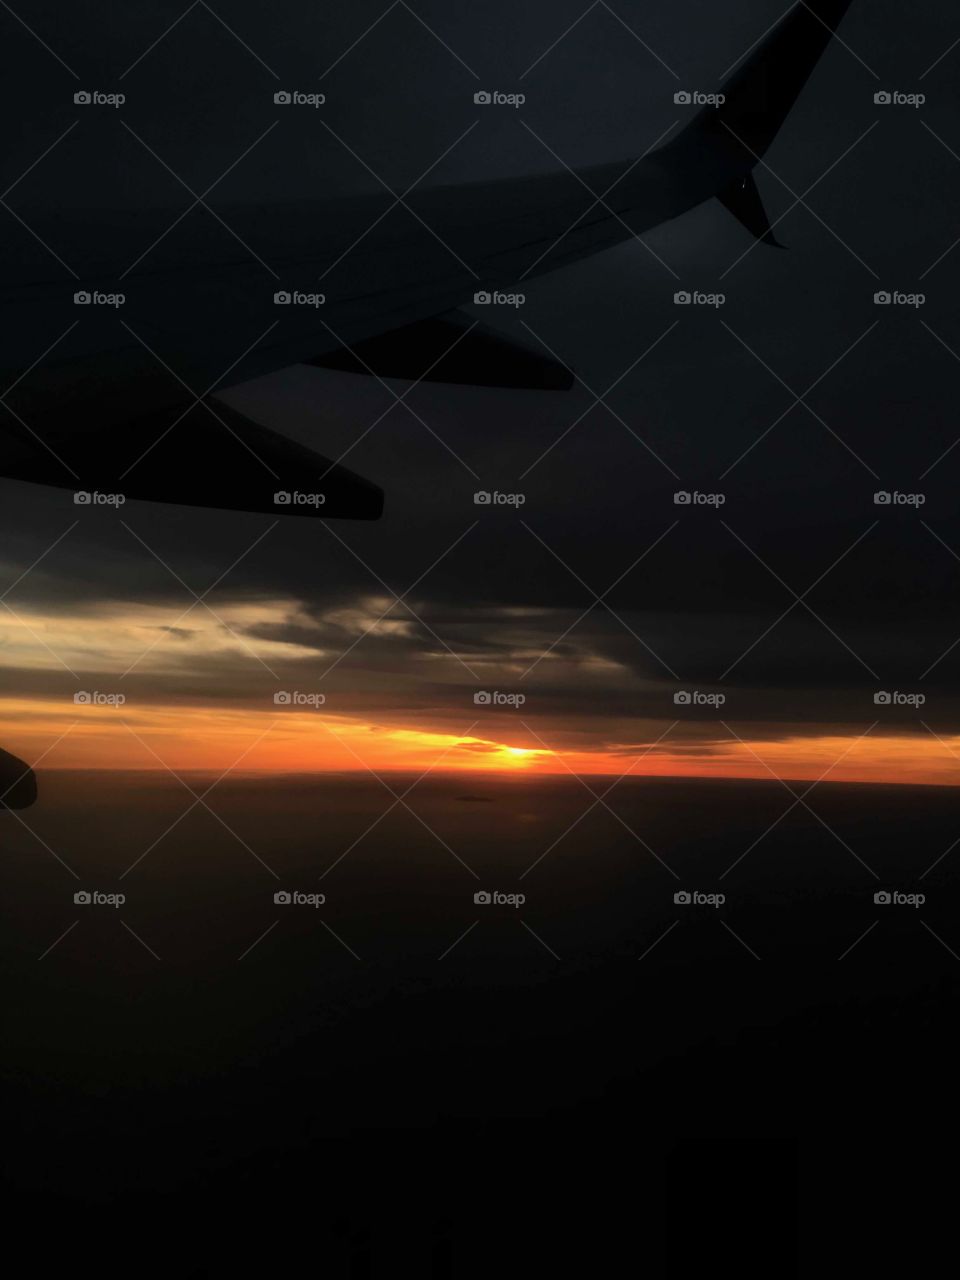 View taken from airplane of sunset 